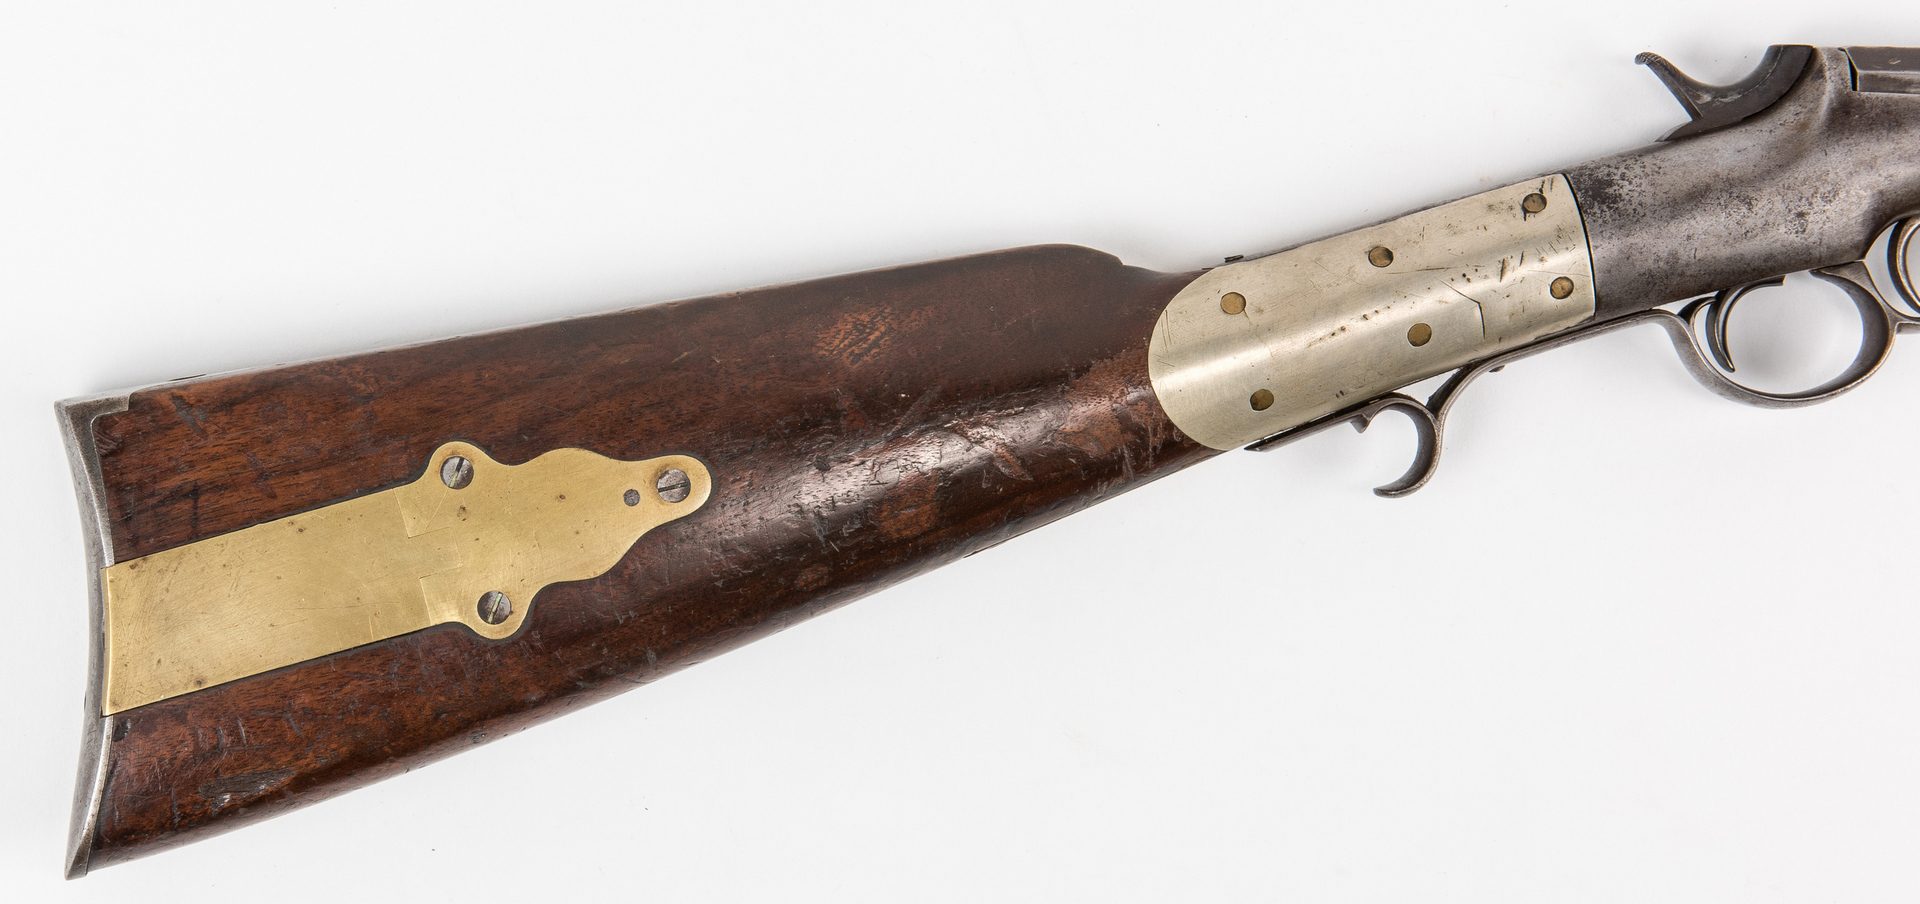 Lot 320: Kittredge Marked Wesson First Model Carbine, .44 rimfire cal.